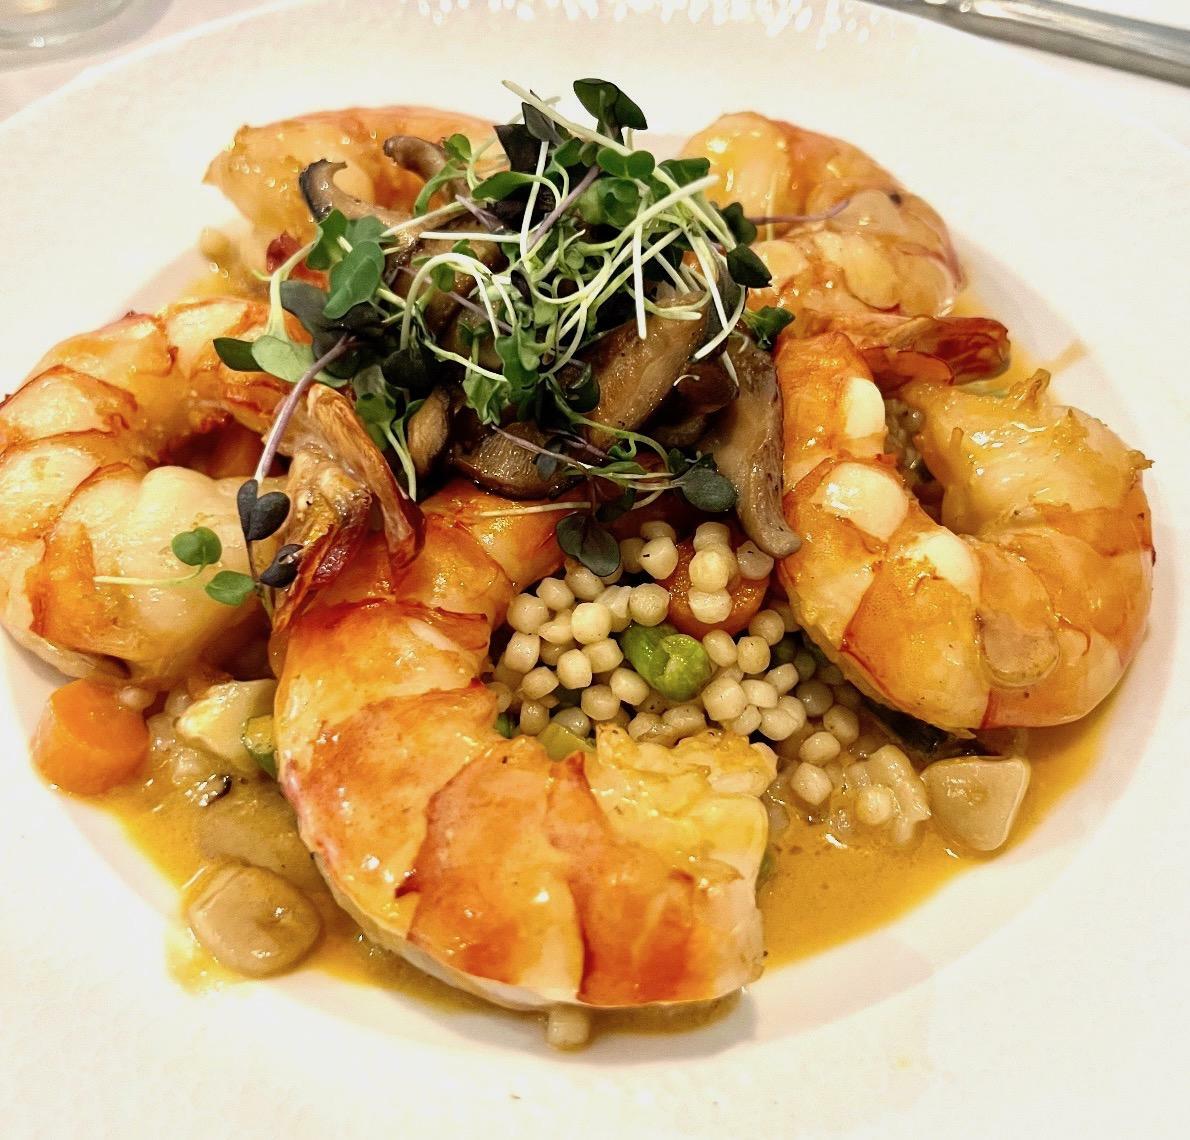 Chef Giancarlo's Jumbo shrimp in aged cognac with pearl vegetable couscous, fried leeks, creamy shrimp sauce is on the menu at Claude's. COURTESY SOUTHAMPTON INN